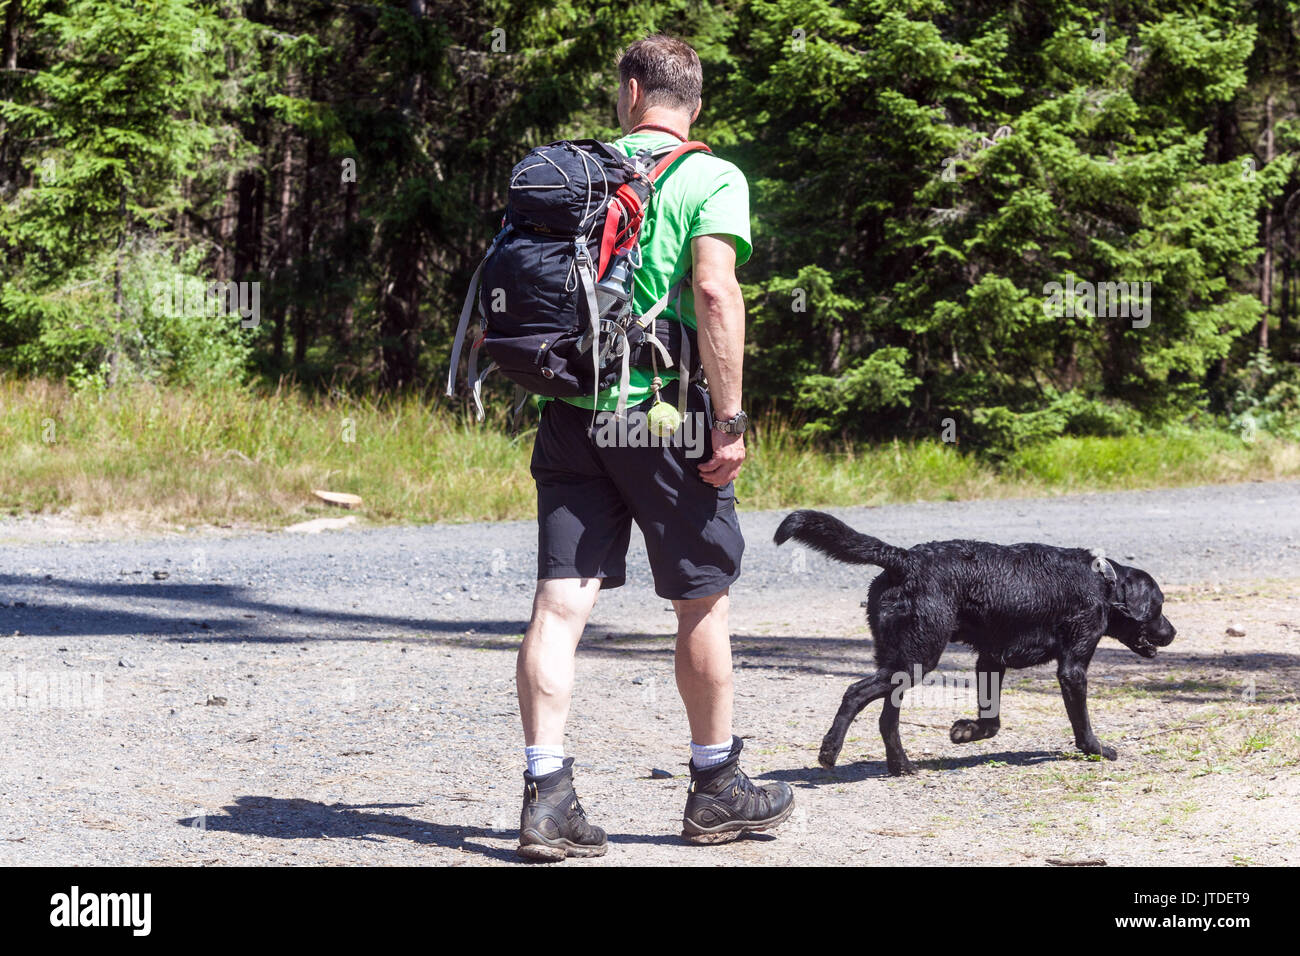 Sumava National Park, Czech Republic, a hiker on trip Man hiking trail with dog walking, man and dog Stock Photo